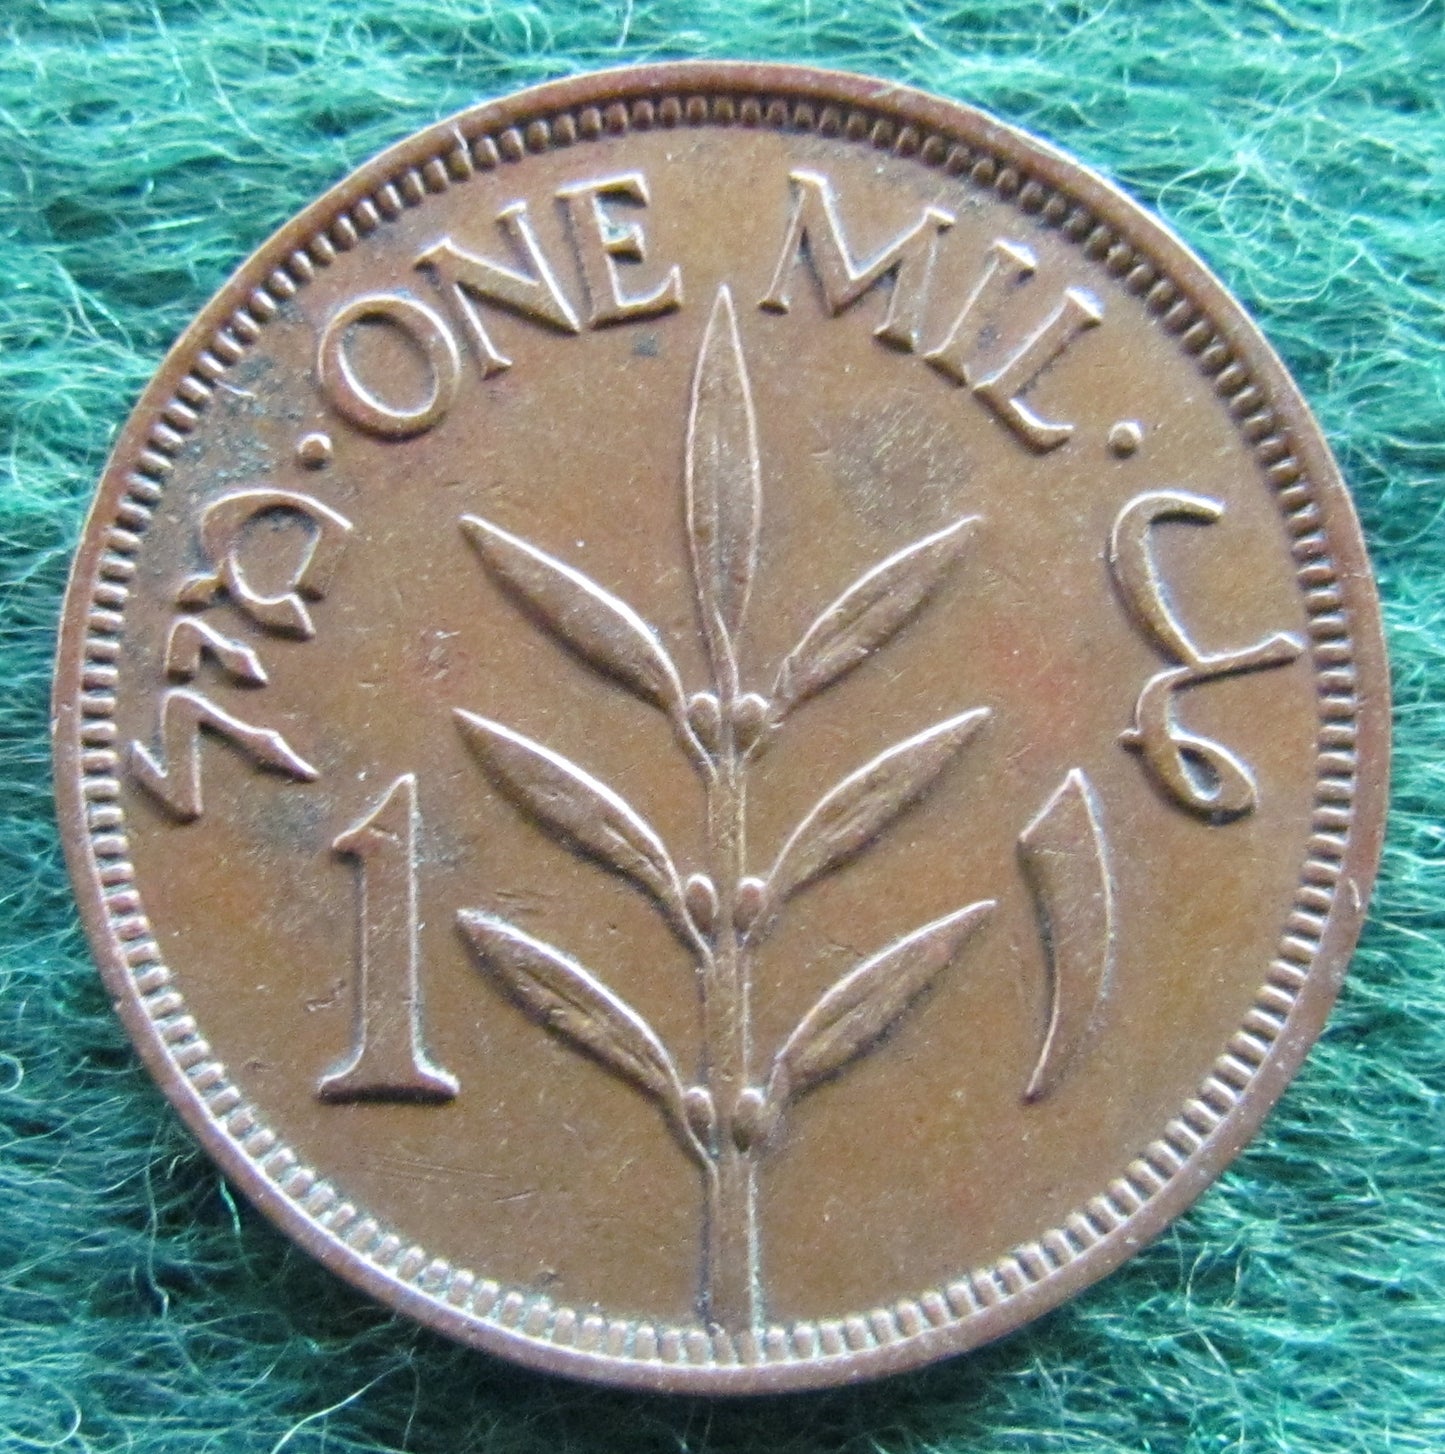 Palestine 1927 1 Mils Coin - Circulated